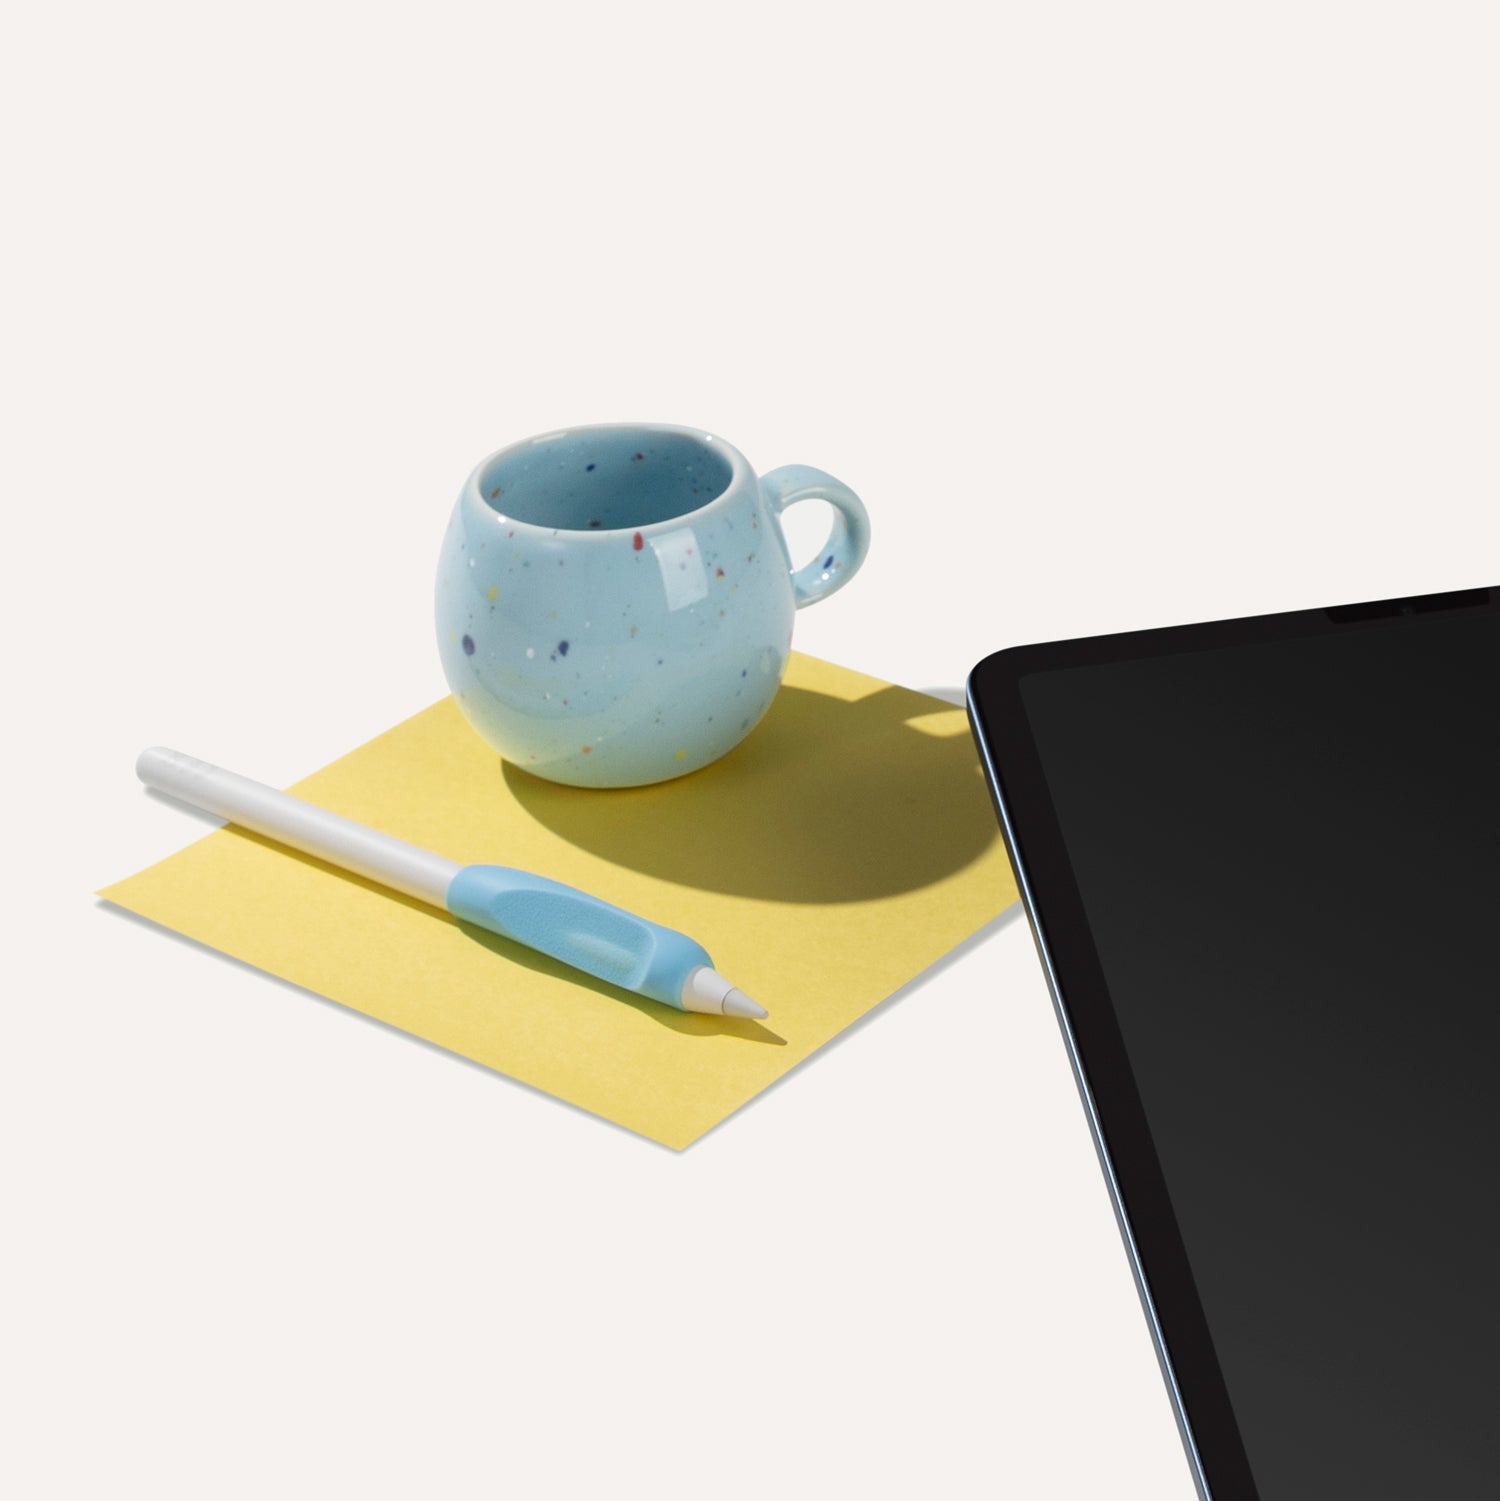 Paperlike's Pencil Grip on an Apple Pencil